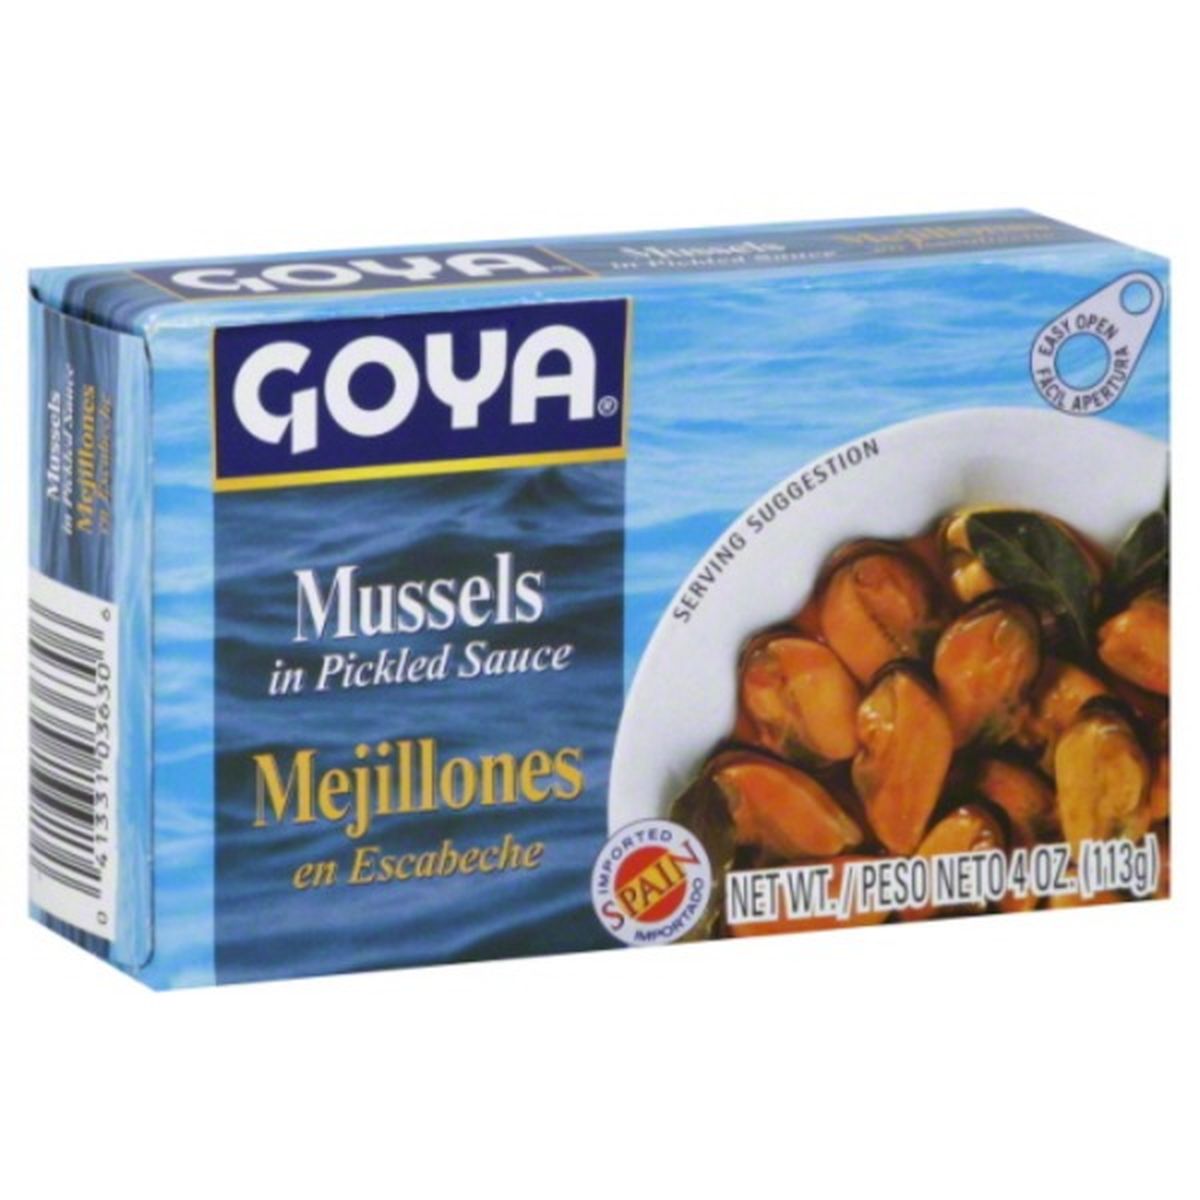 Calories in Goya Mussels, in Pickled Sauce